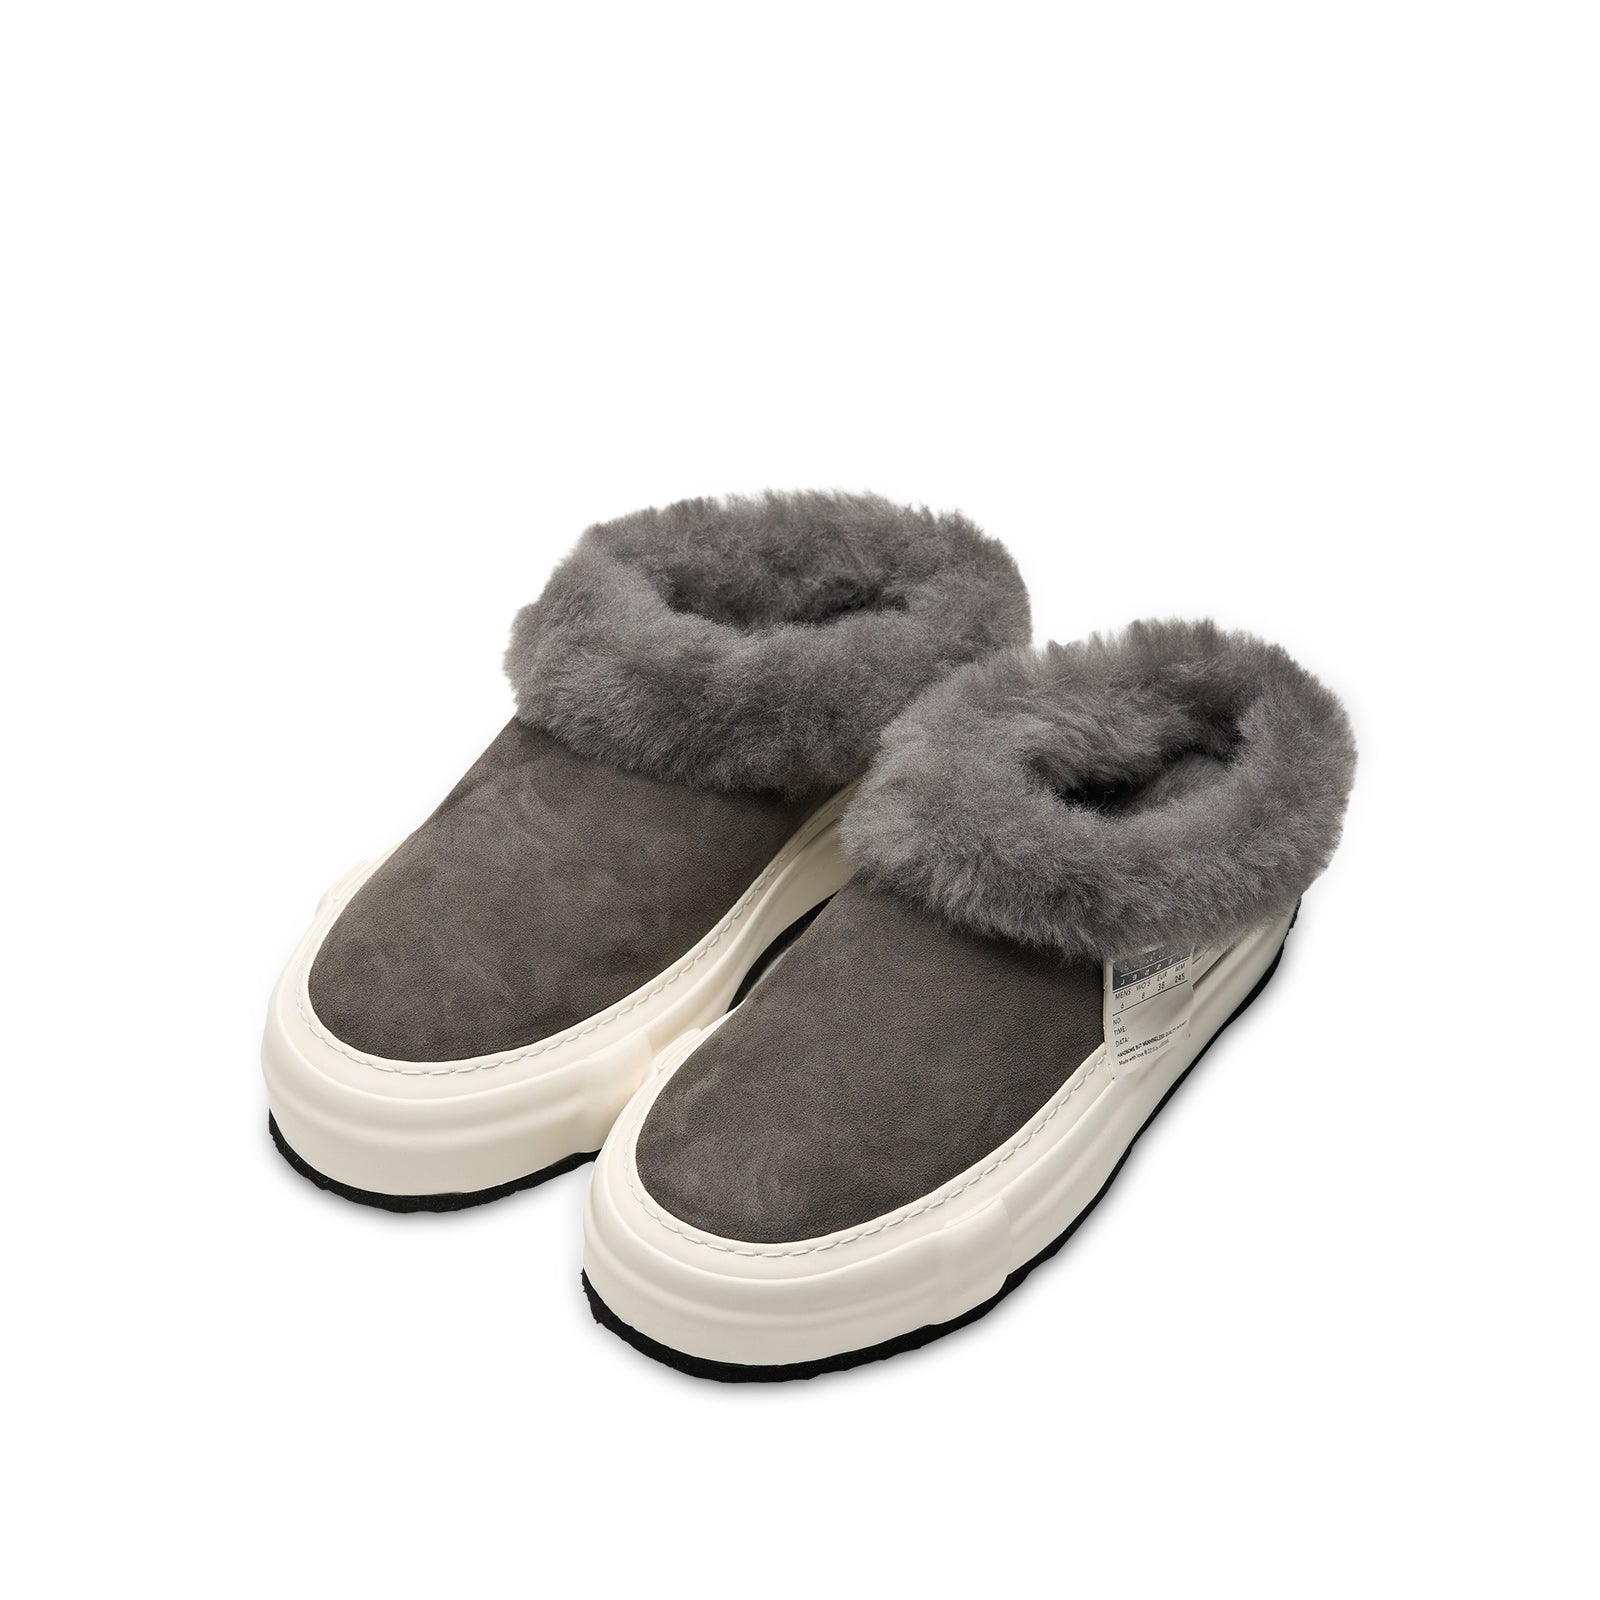 xVESSEL Slip On Warmers - Wolf Suede